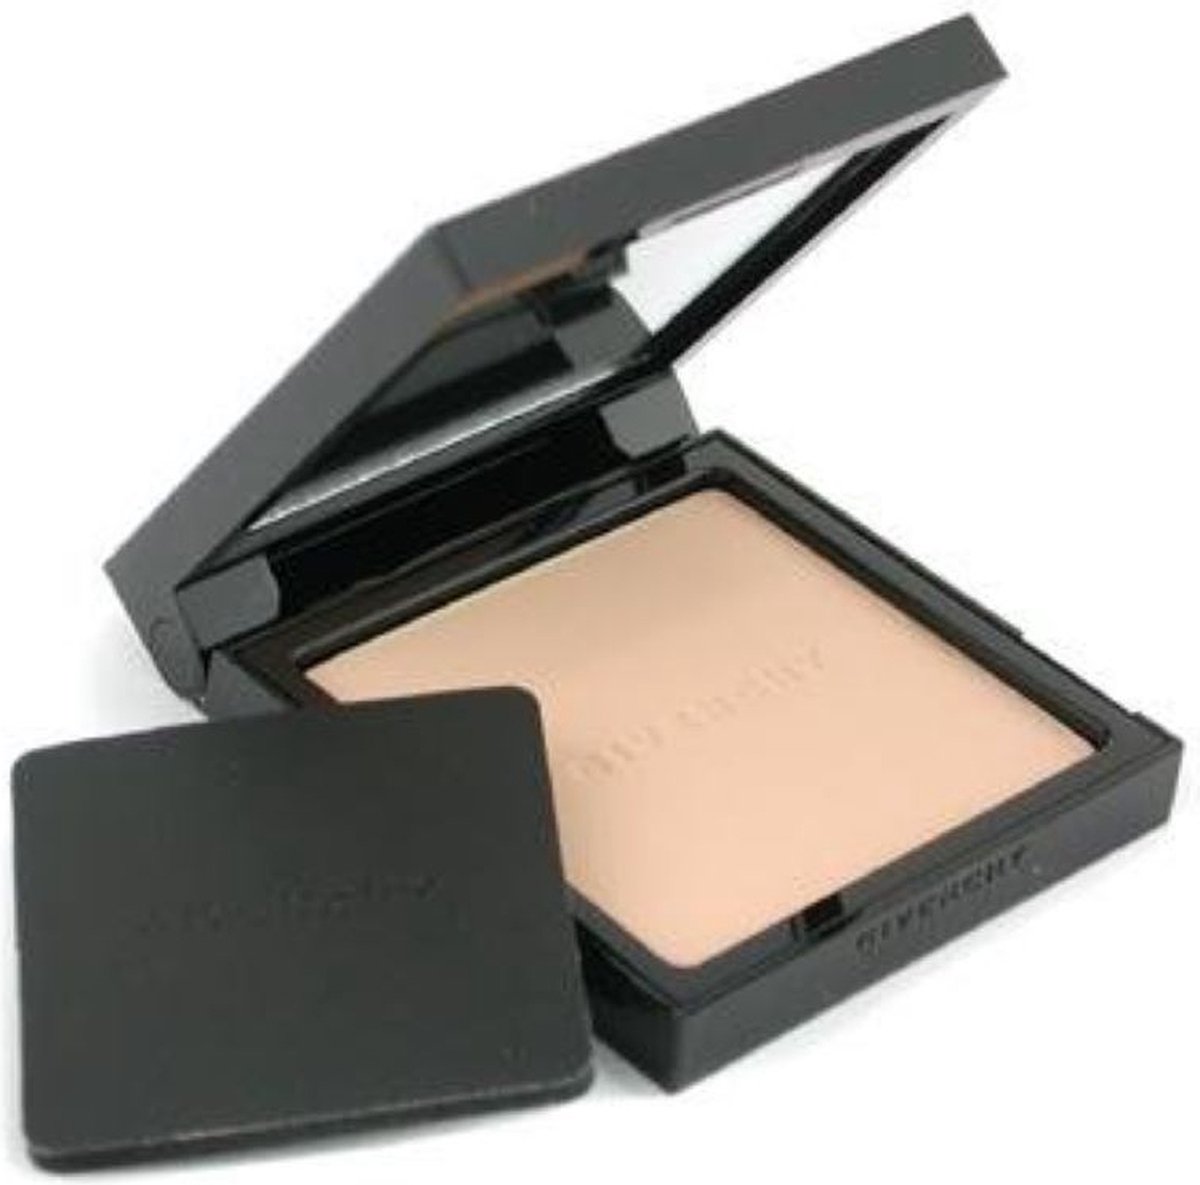 GIVENCHY MATISSIME Powder Foundation, Absolute Finish Refillable - SPF 20 - 12 MAT NUDE